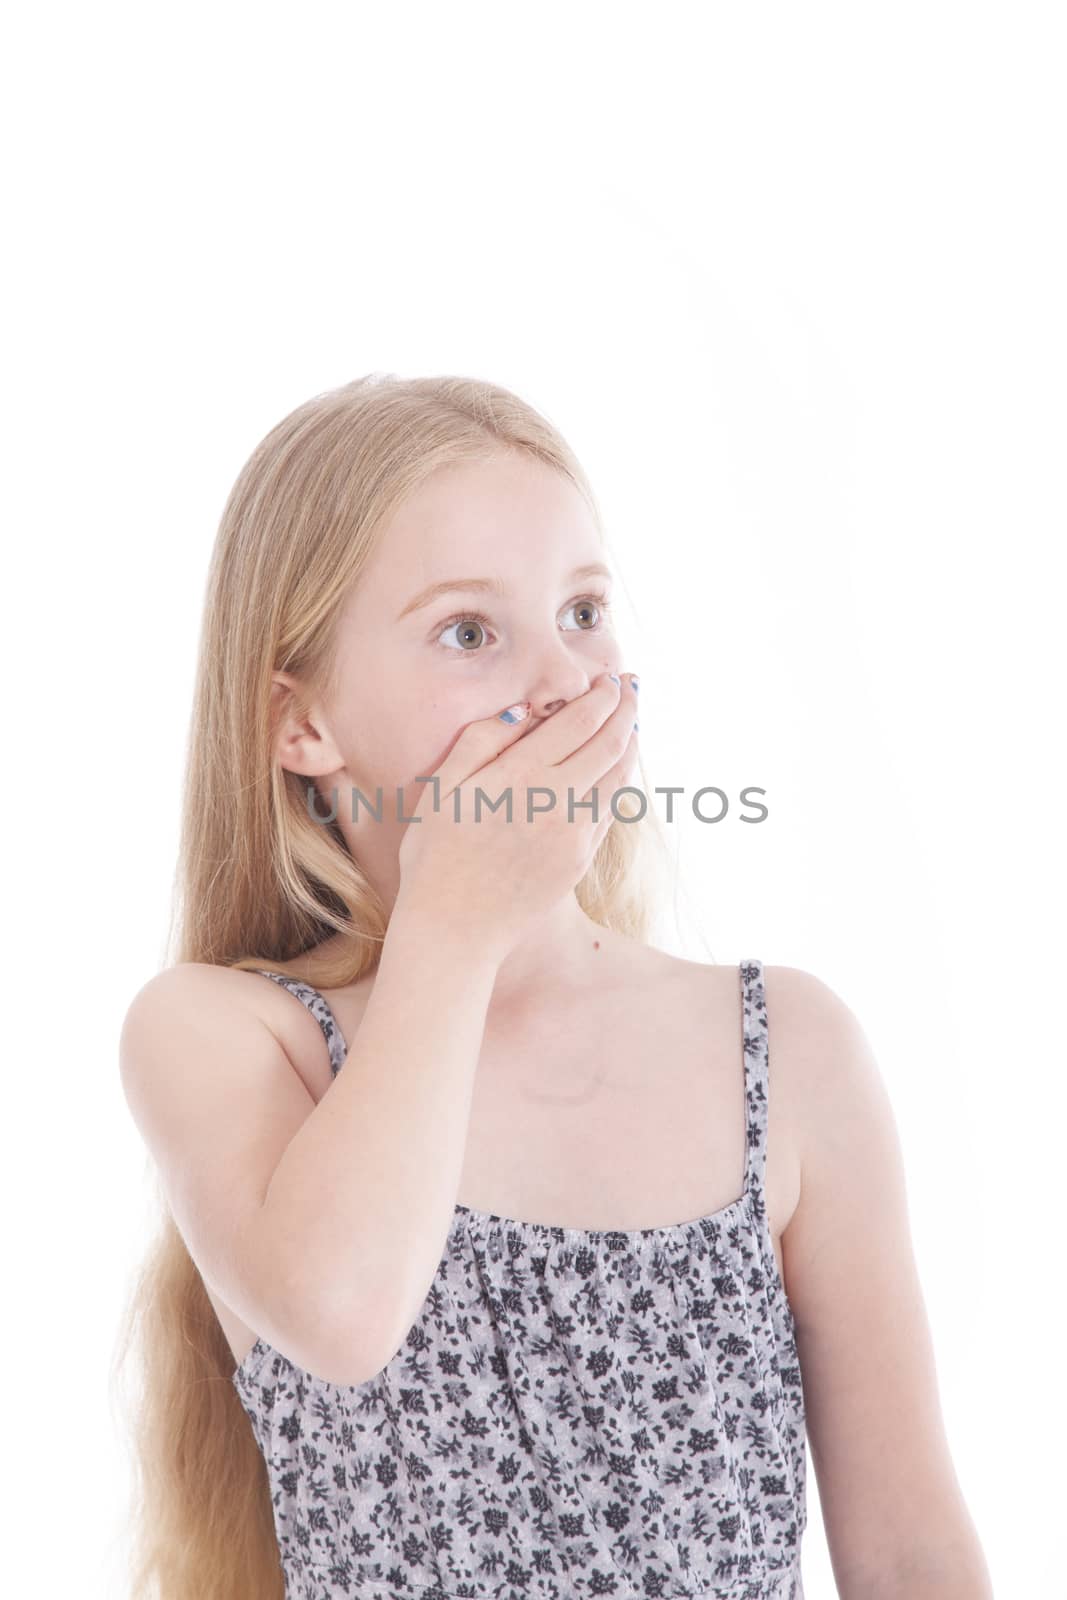 young blond girl with astonished expression in studio against white background